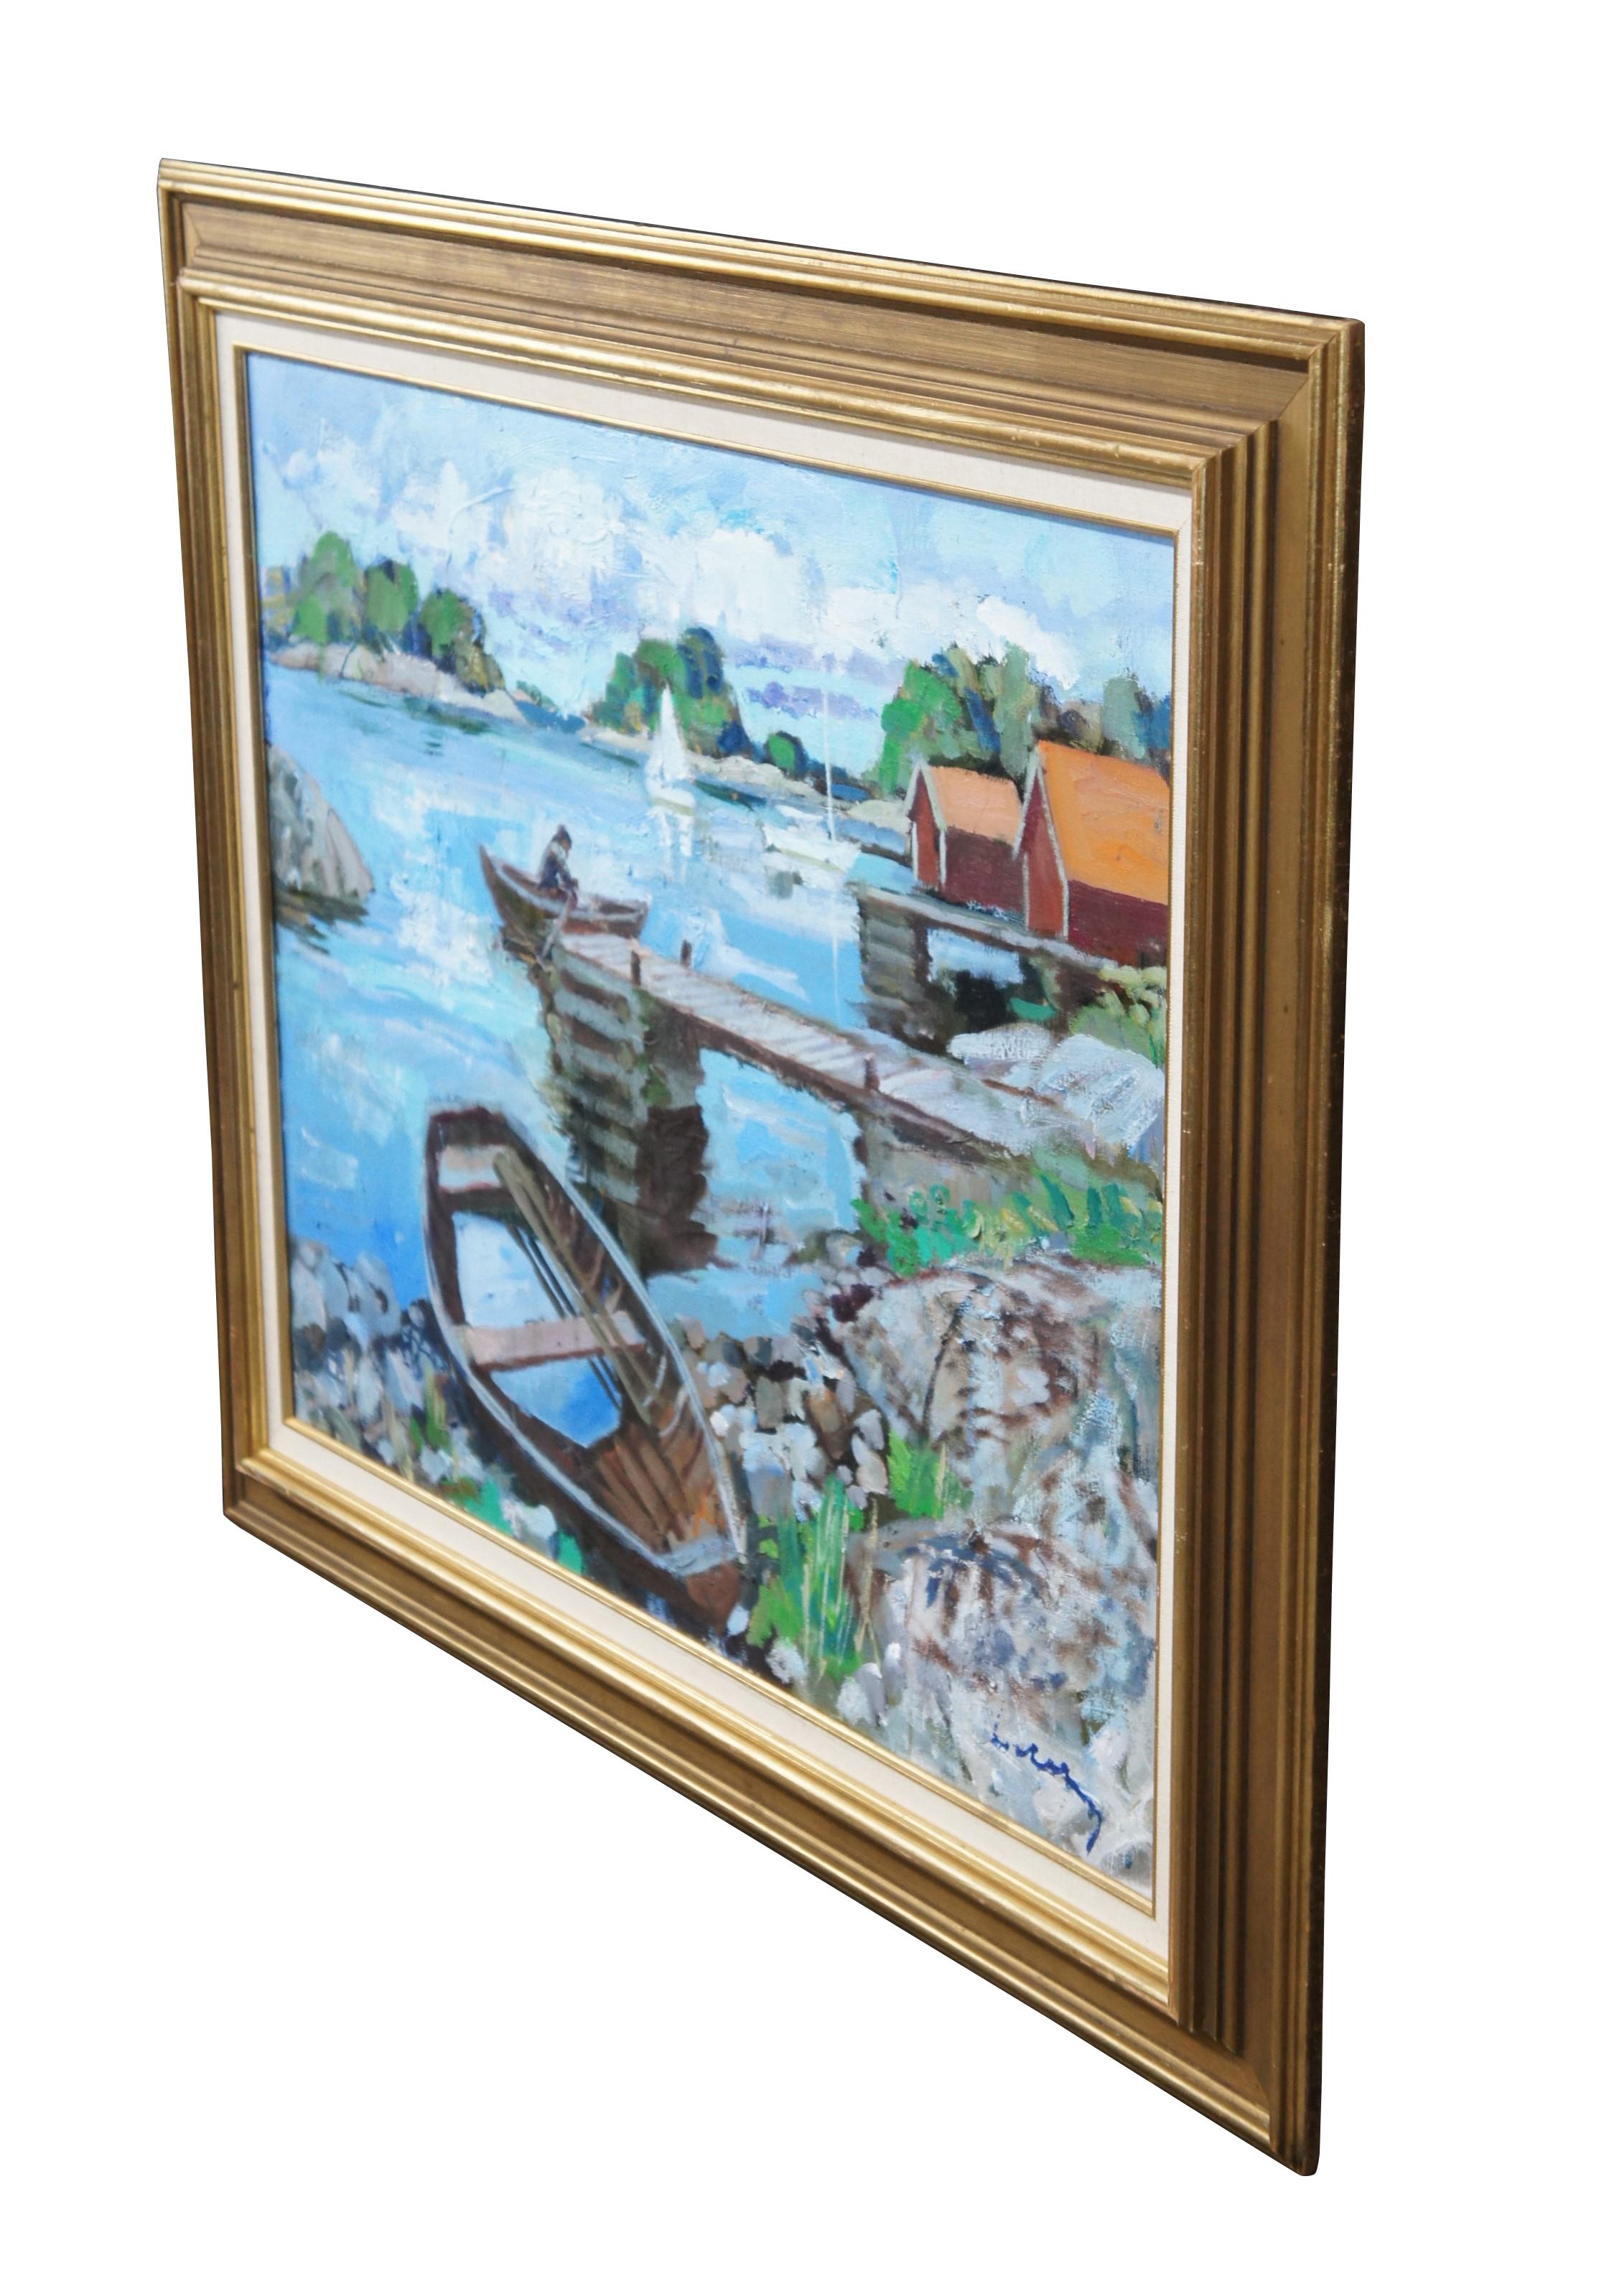 Expressionist 20th Century Impressionist Oil on Canvas Dockside Seascape Painting Framed 40